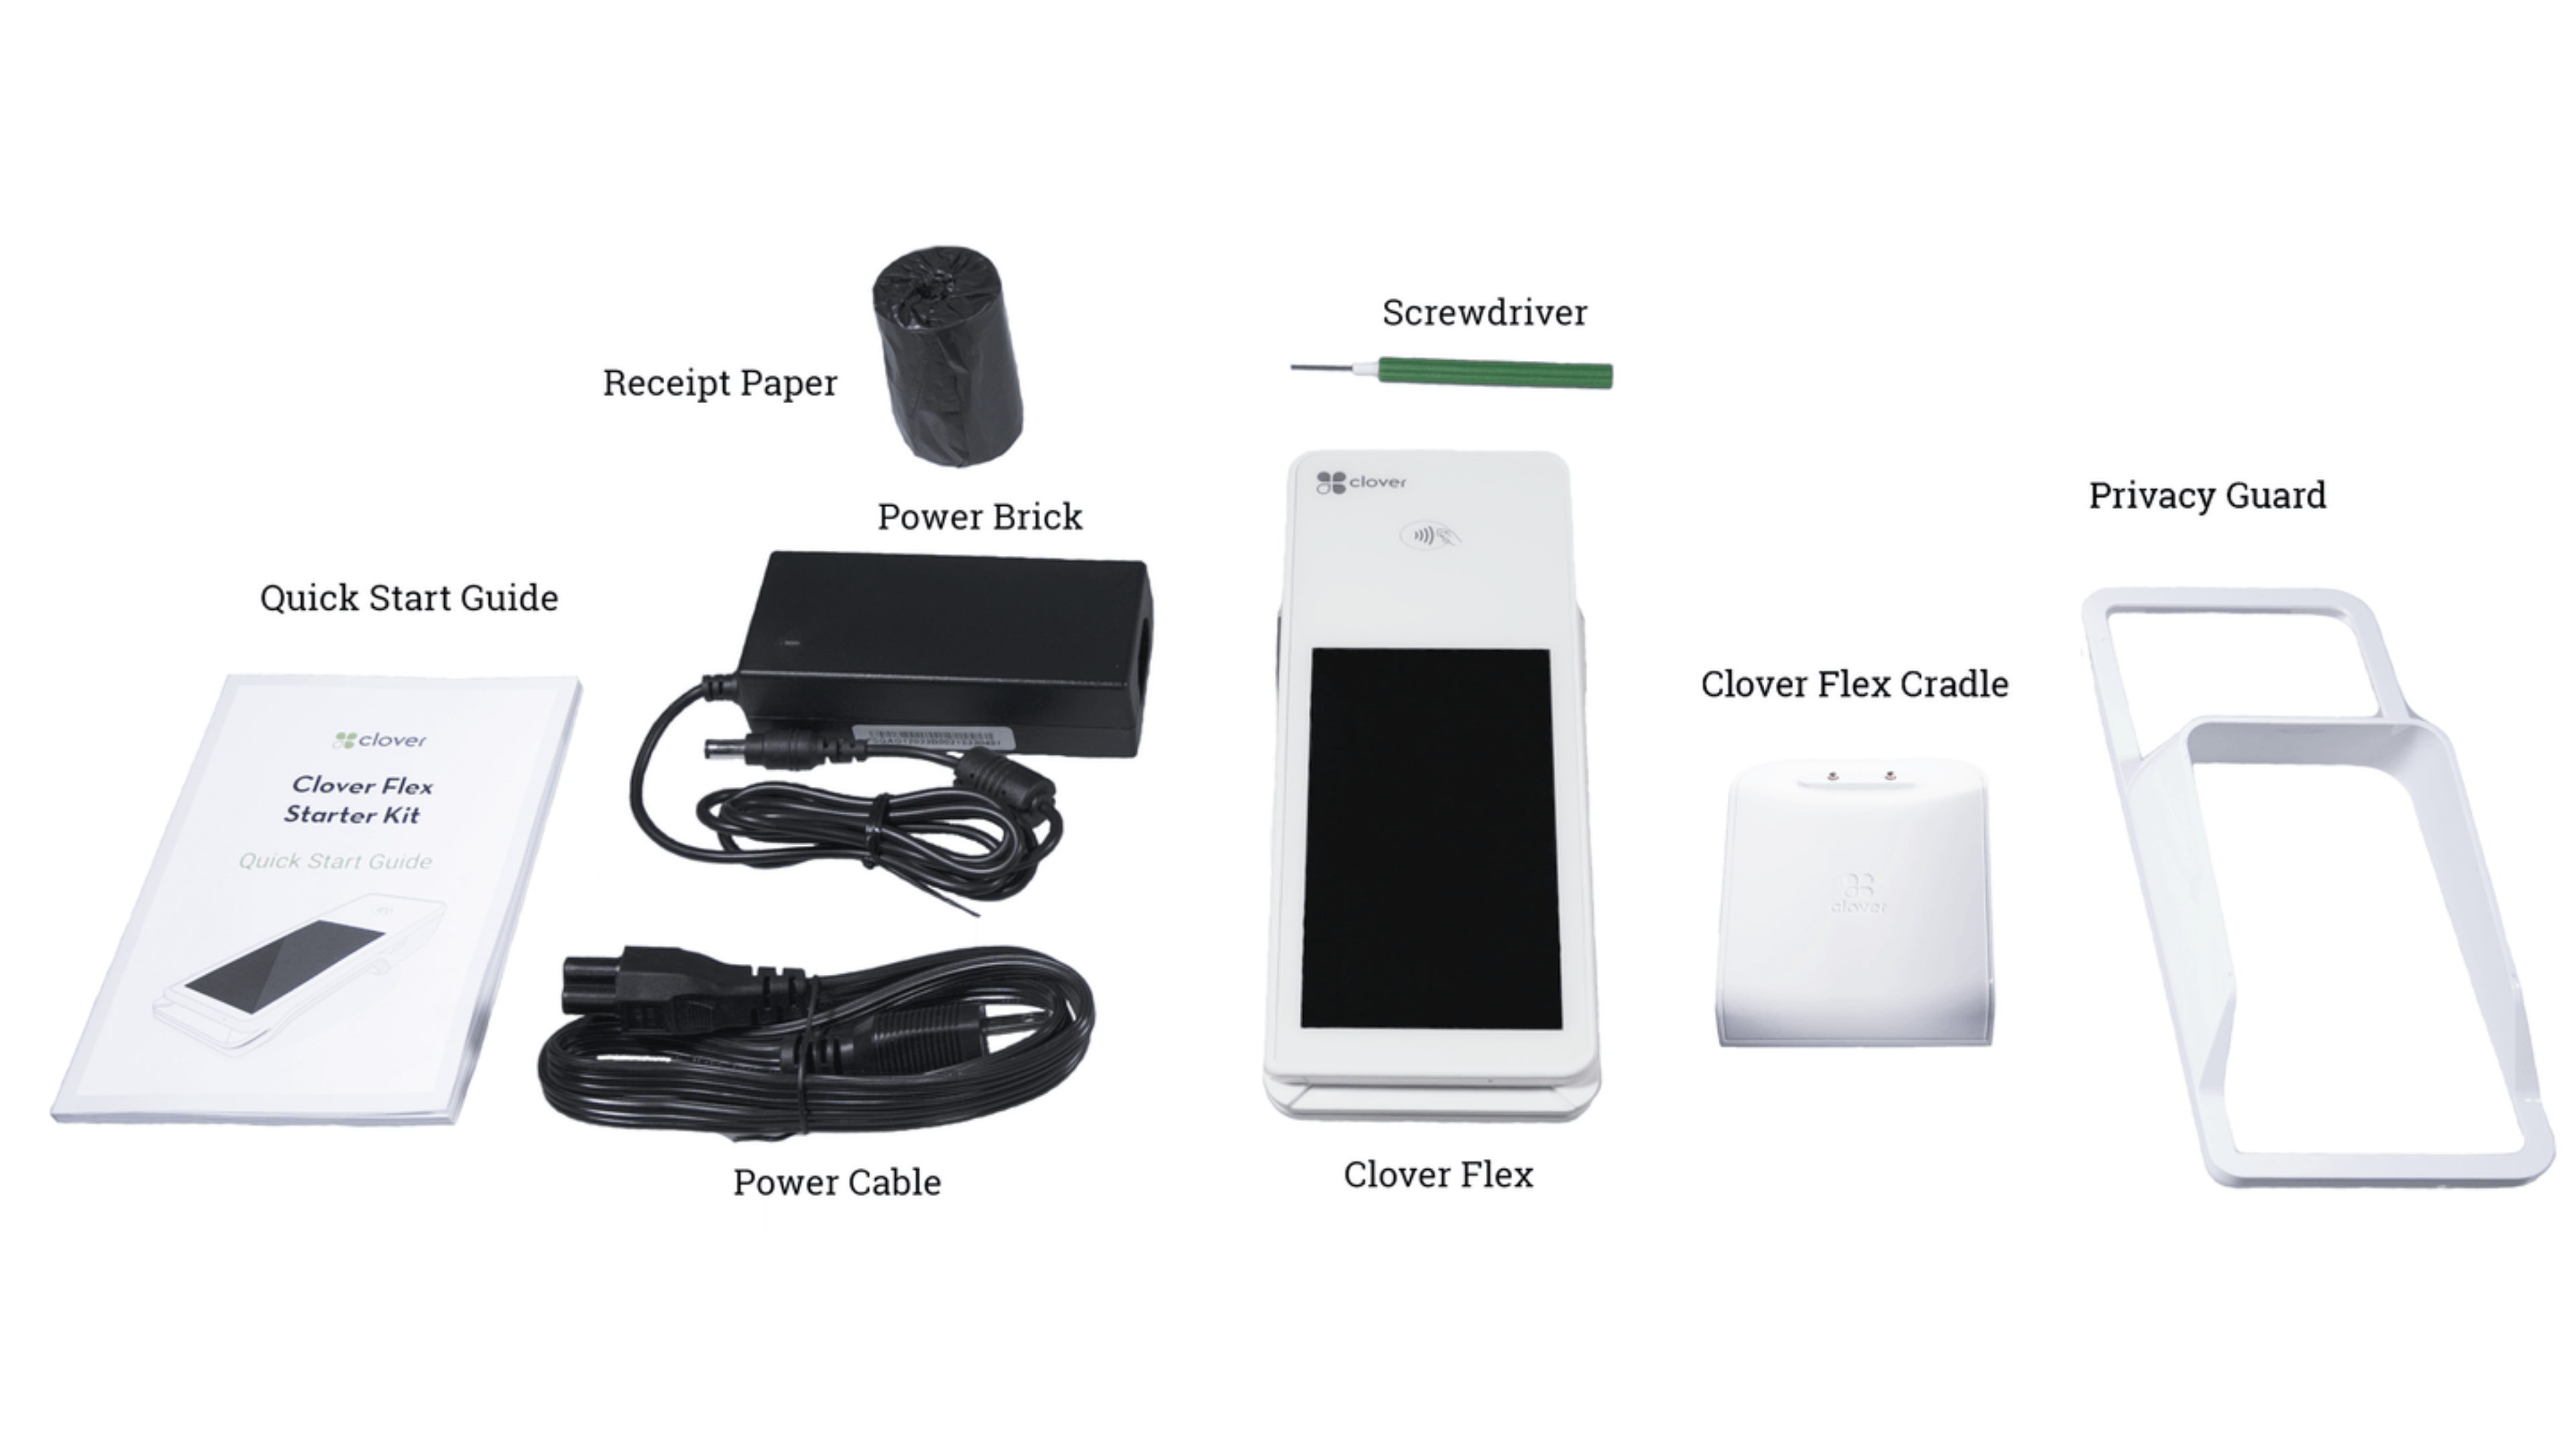 What accessories are available for the Clover Flex, and how do they help businesses run more efficiently